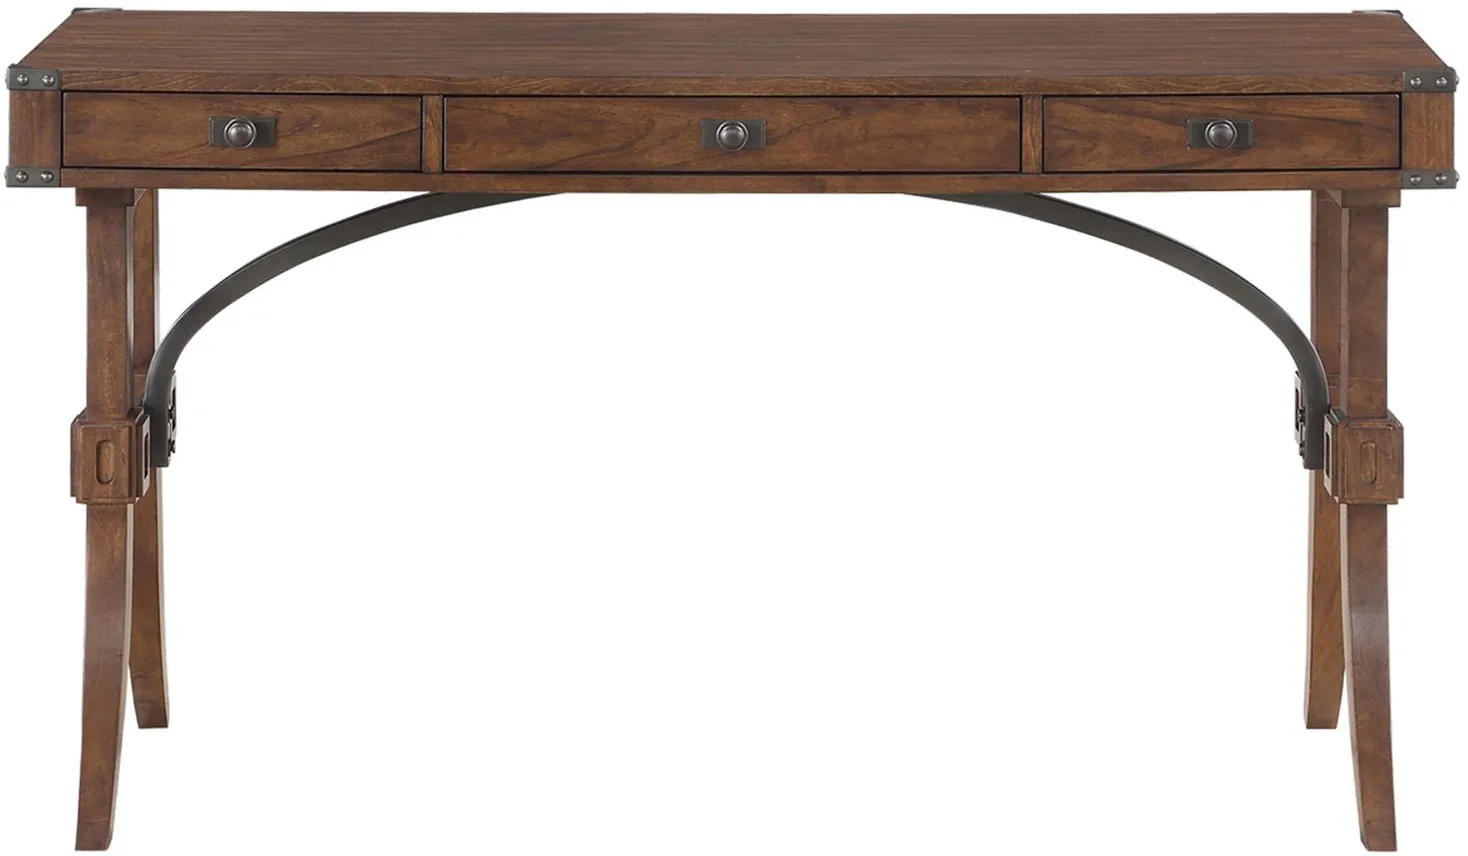 Tamsin Writing Desk in Brown cherry by Homelegance